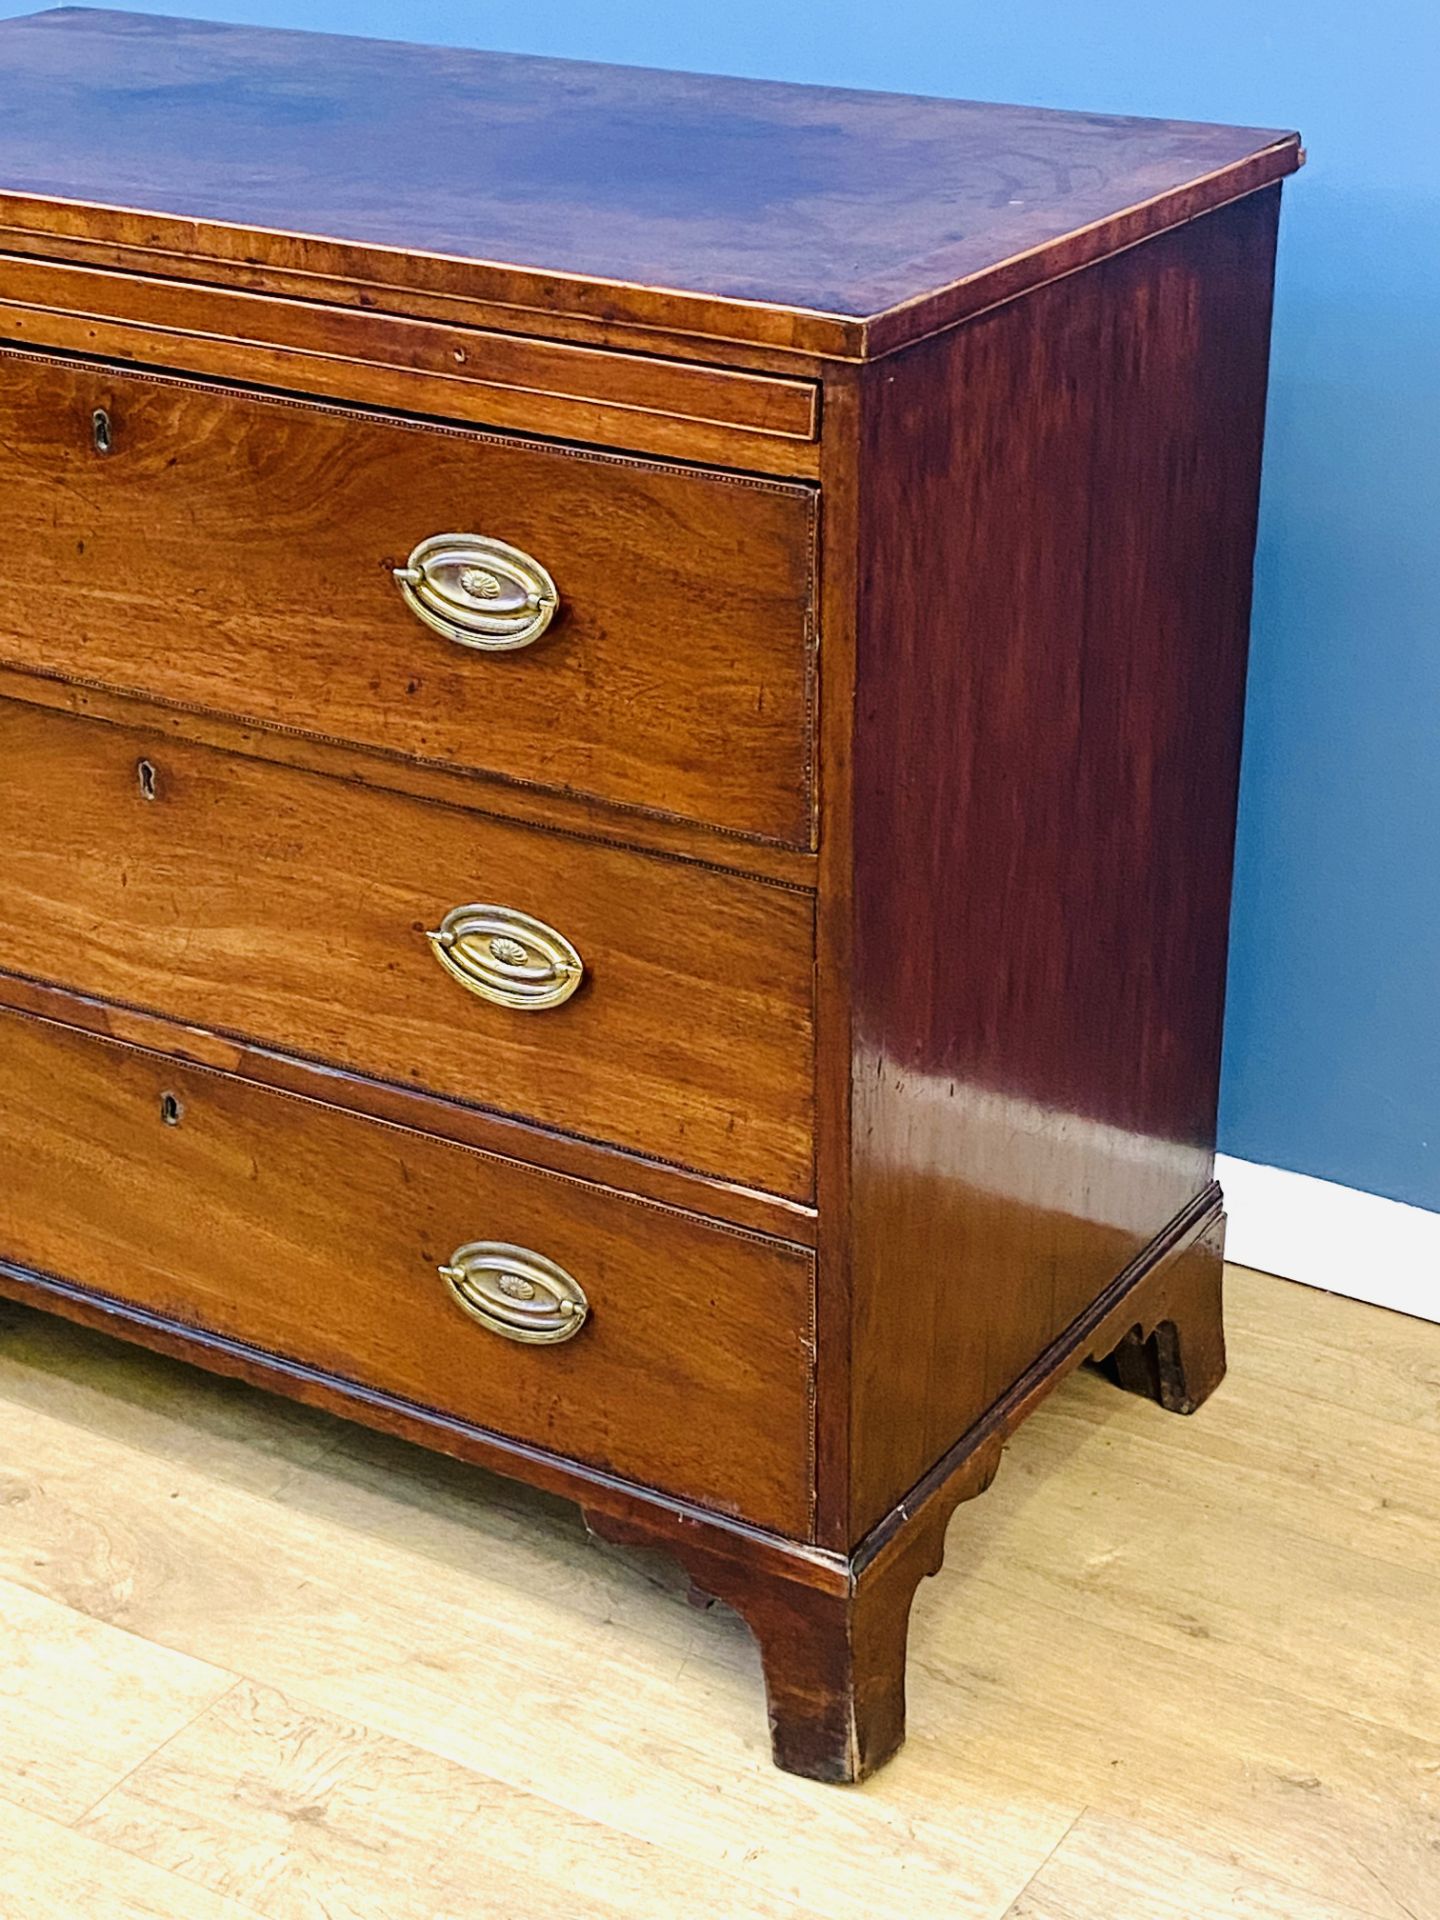 Mahogany chest of drawers - Image 2 of 5